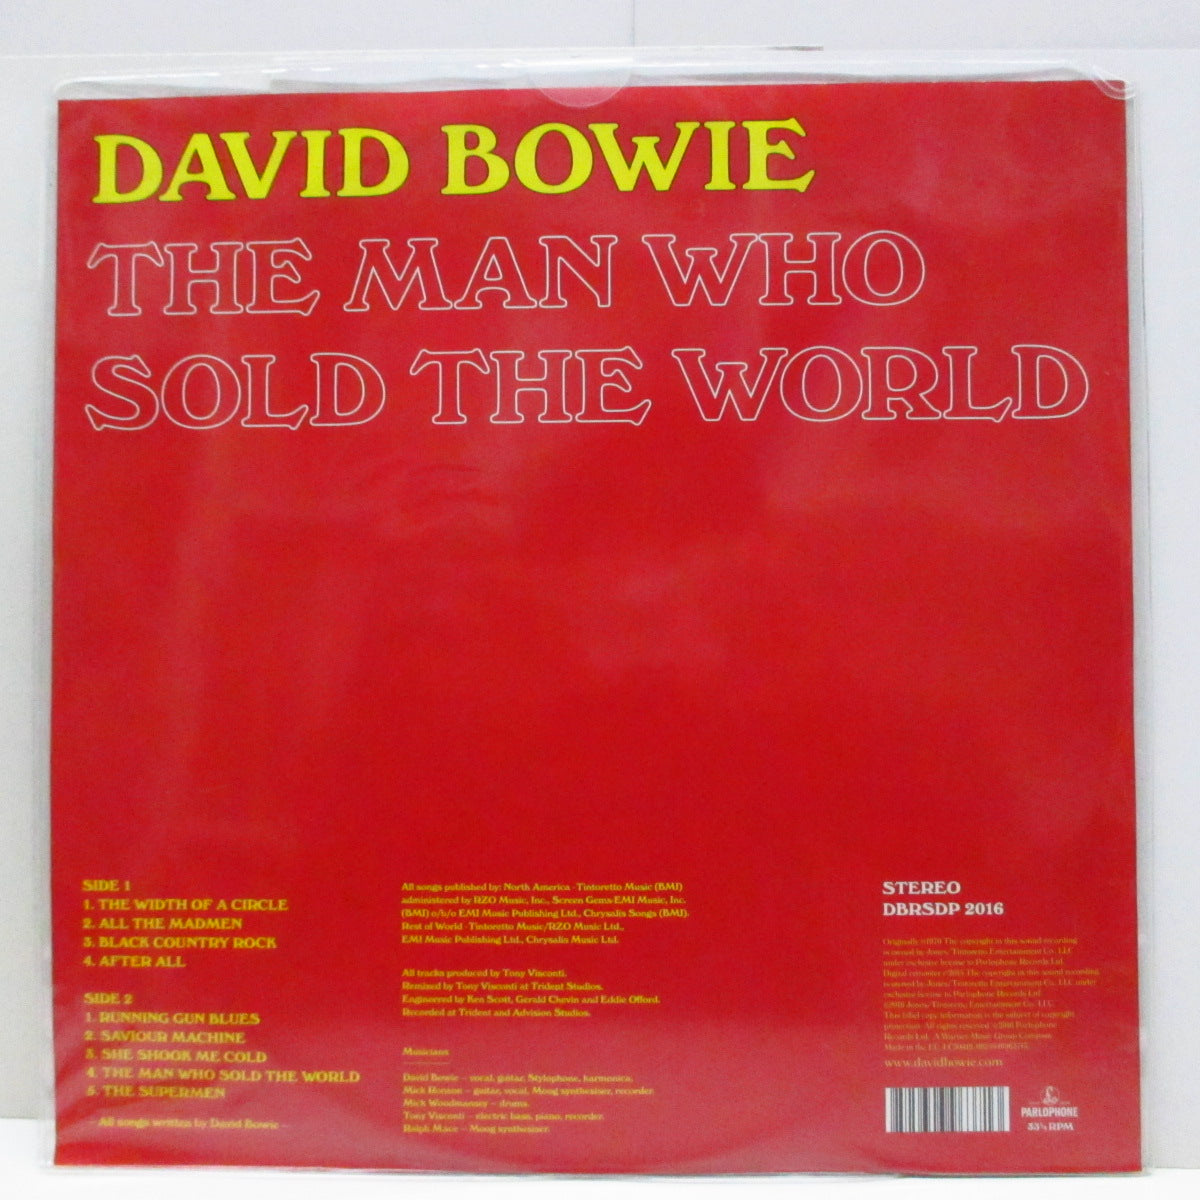 DAVID BOWIE (デヴィッド・ボウイ) - The Man Who Sold The World (US-EU 5